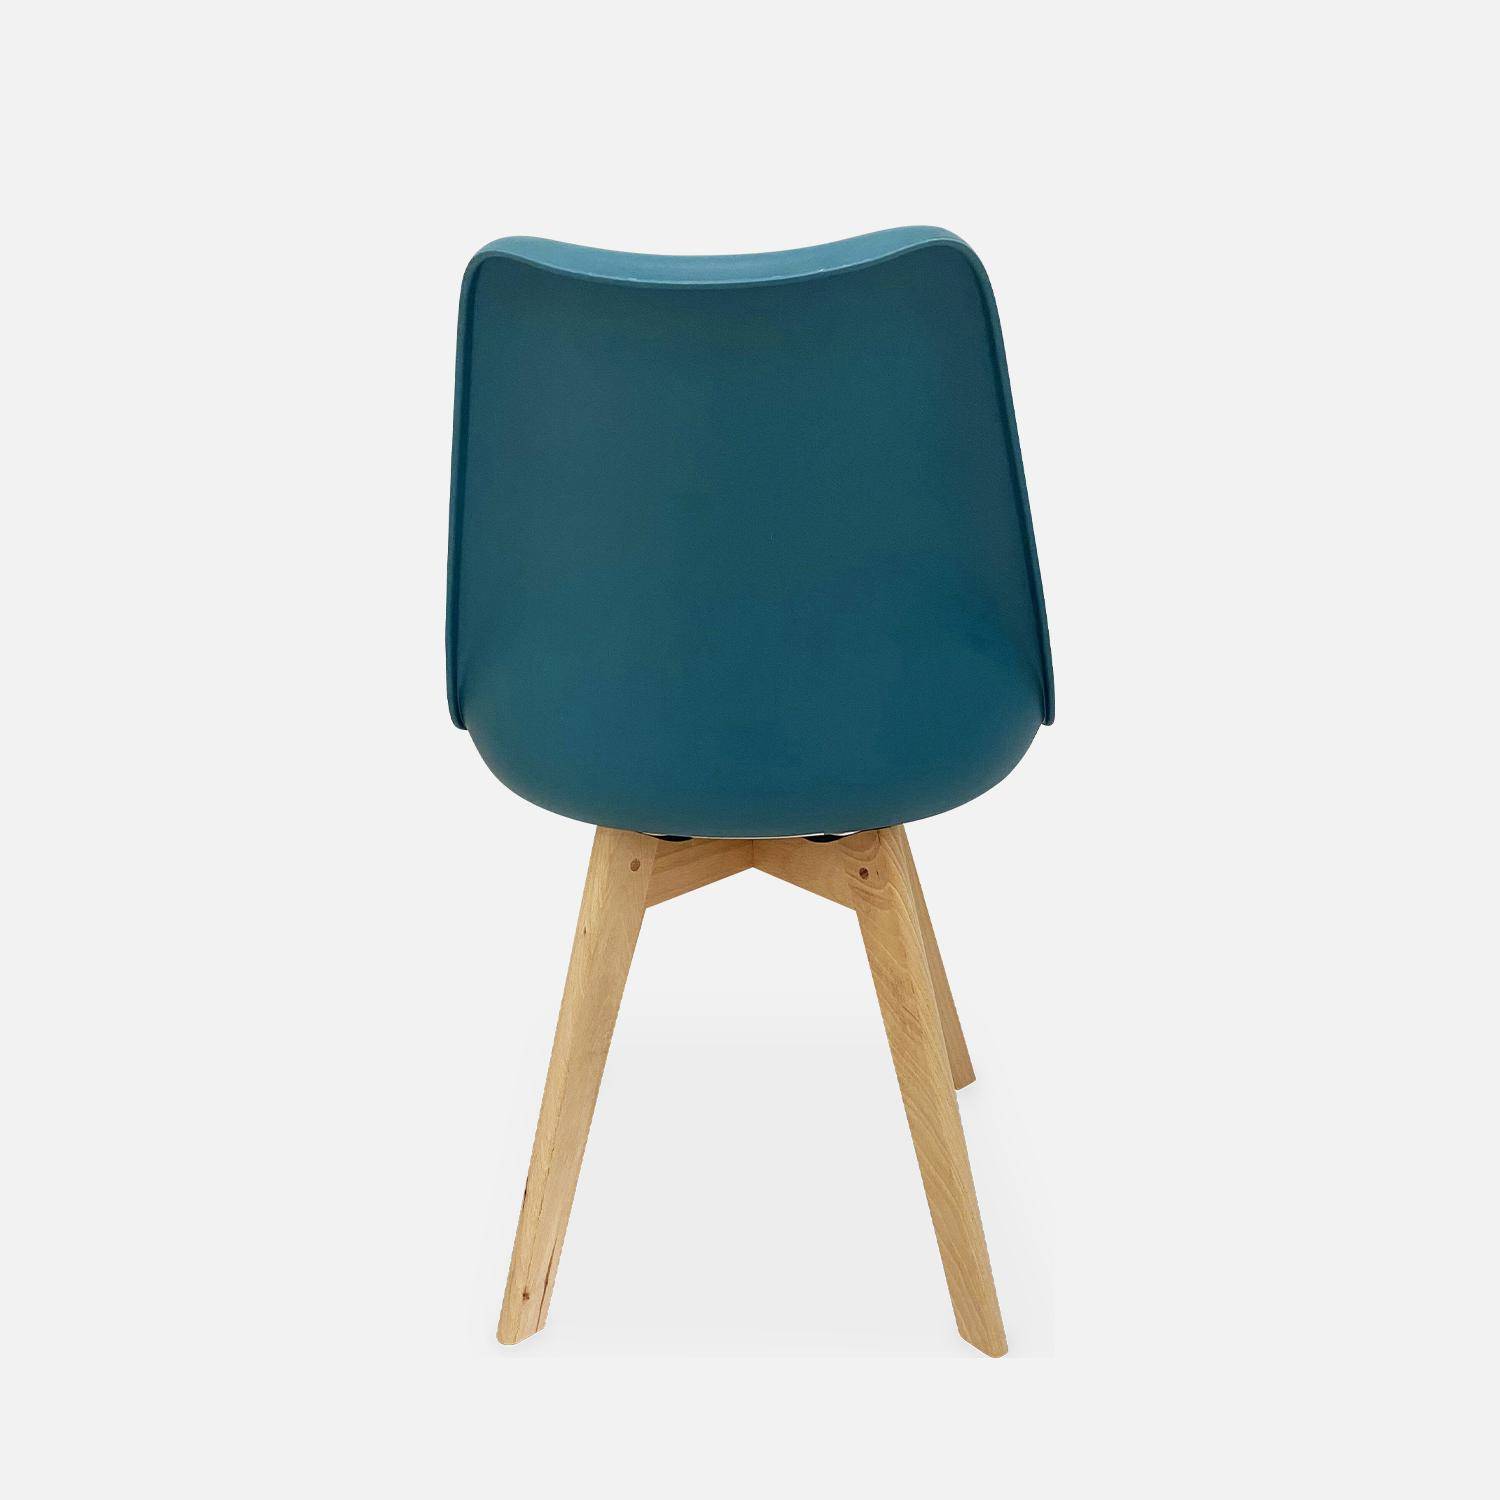 Pair of scandi-style faux-leather dining chair, blue, L49 x D55 x H81cm, NILS Photo4